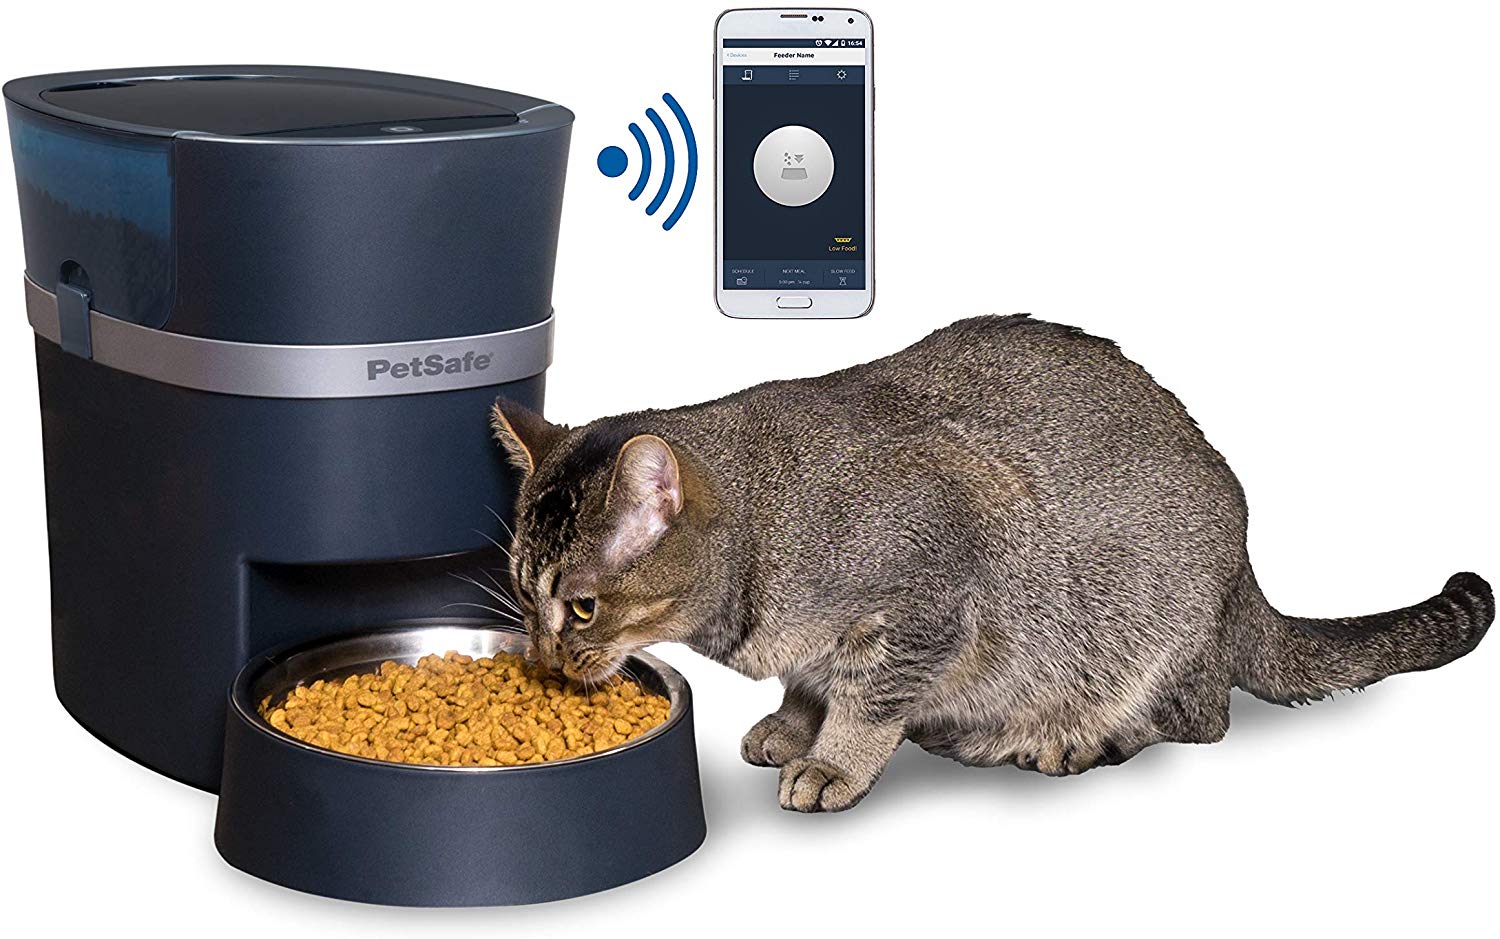 Orita 12 Meals SmartFeeder,Auto Pet Dog and Cat Feeder 1080P HD WiFi Pet Camera with Night Vision for Pet Viewing,2-Way Audio Communication 